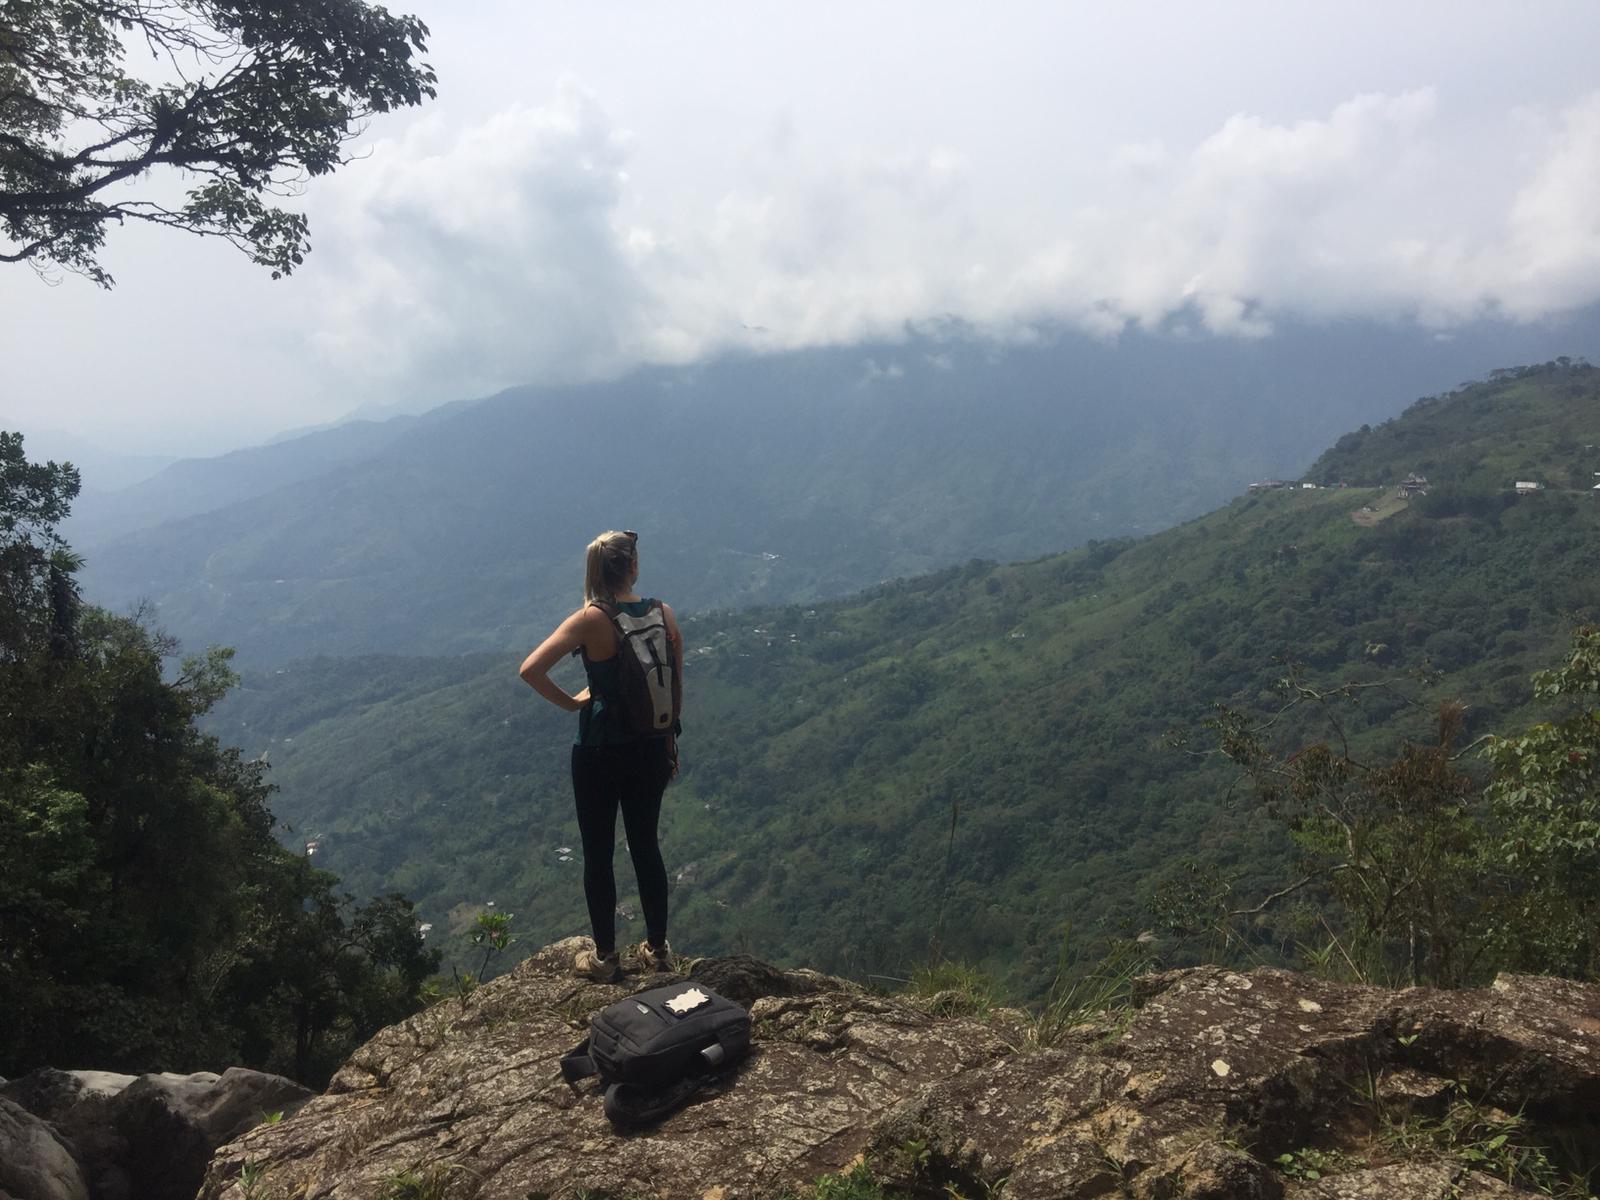 Toni from aWheelinthesky.com hiking in Colombia